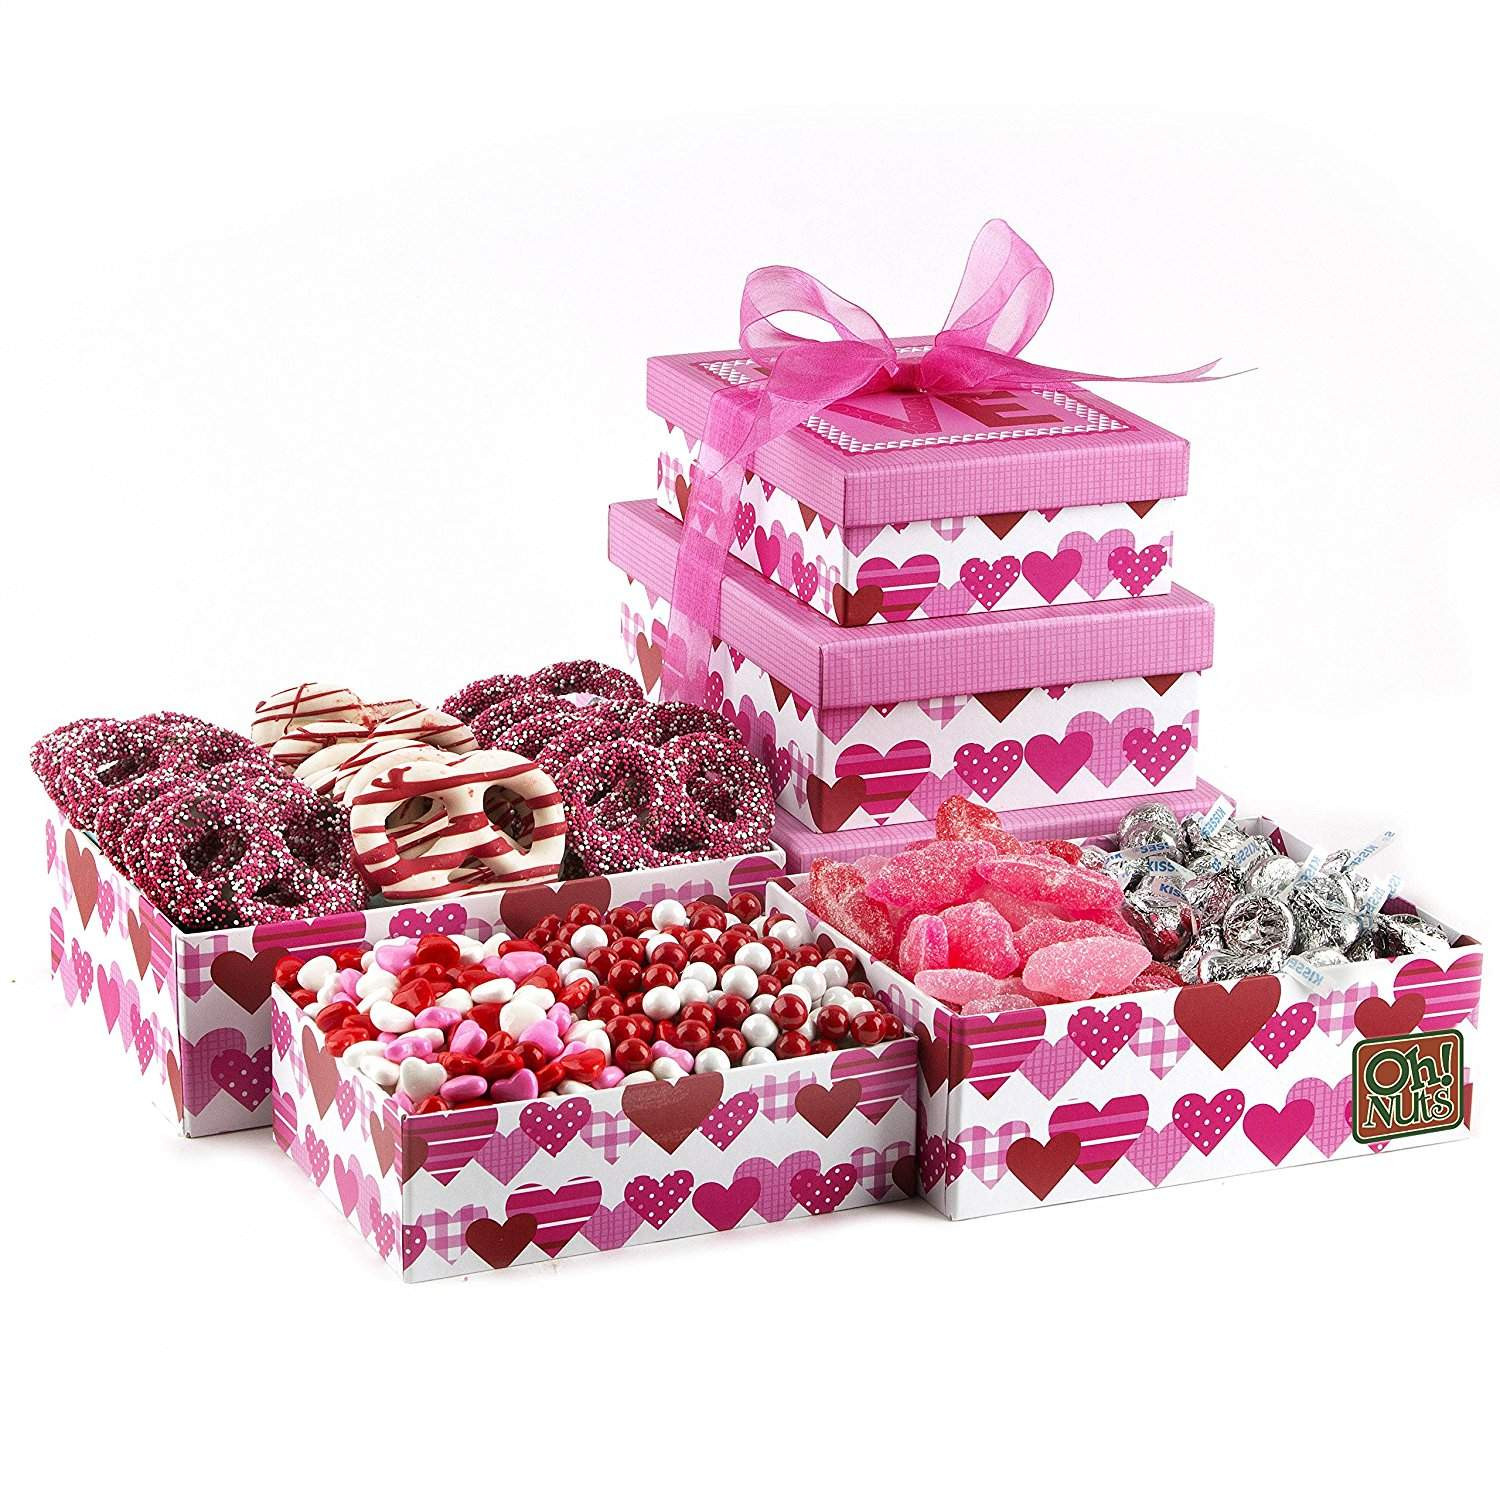 Valentines Day Candy Gift Ideas
 Top 10 Best Valentine’s Day Candy Gift Ideas